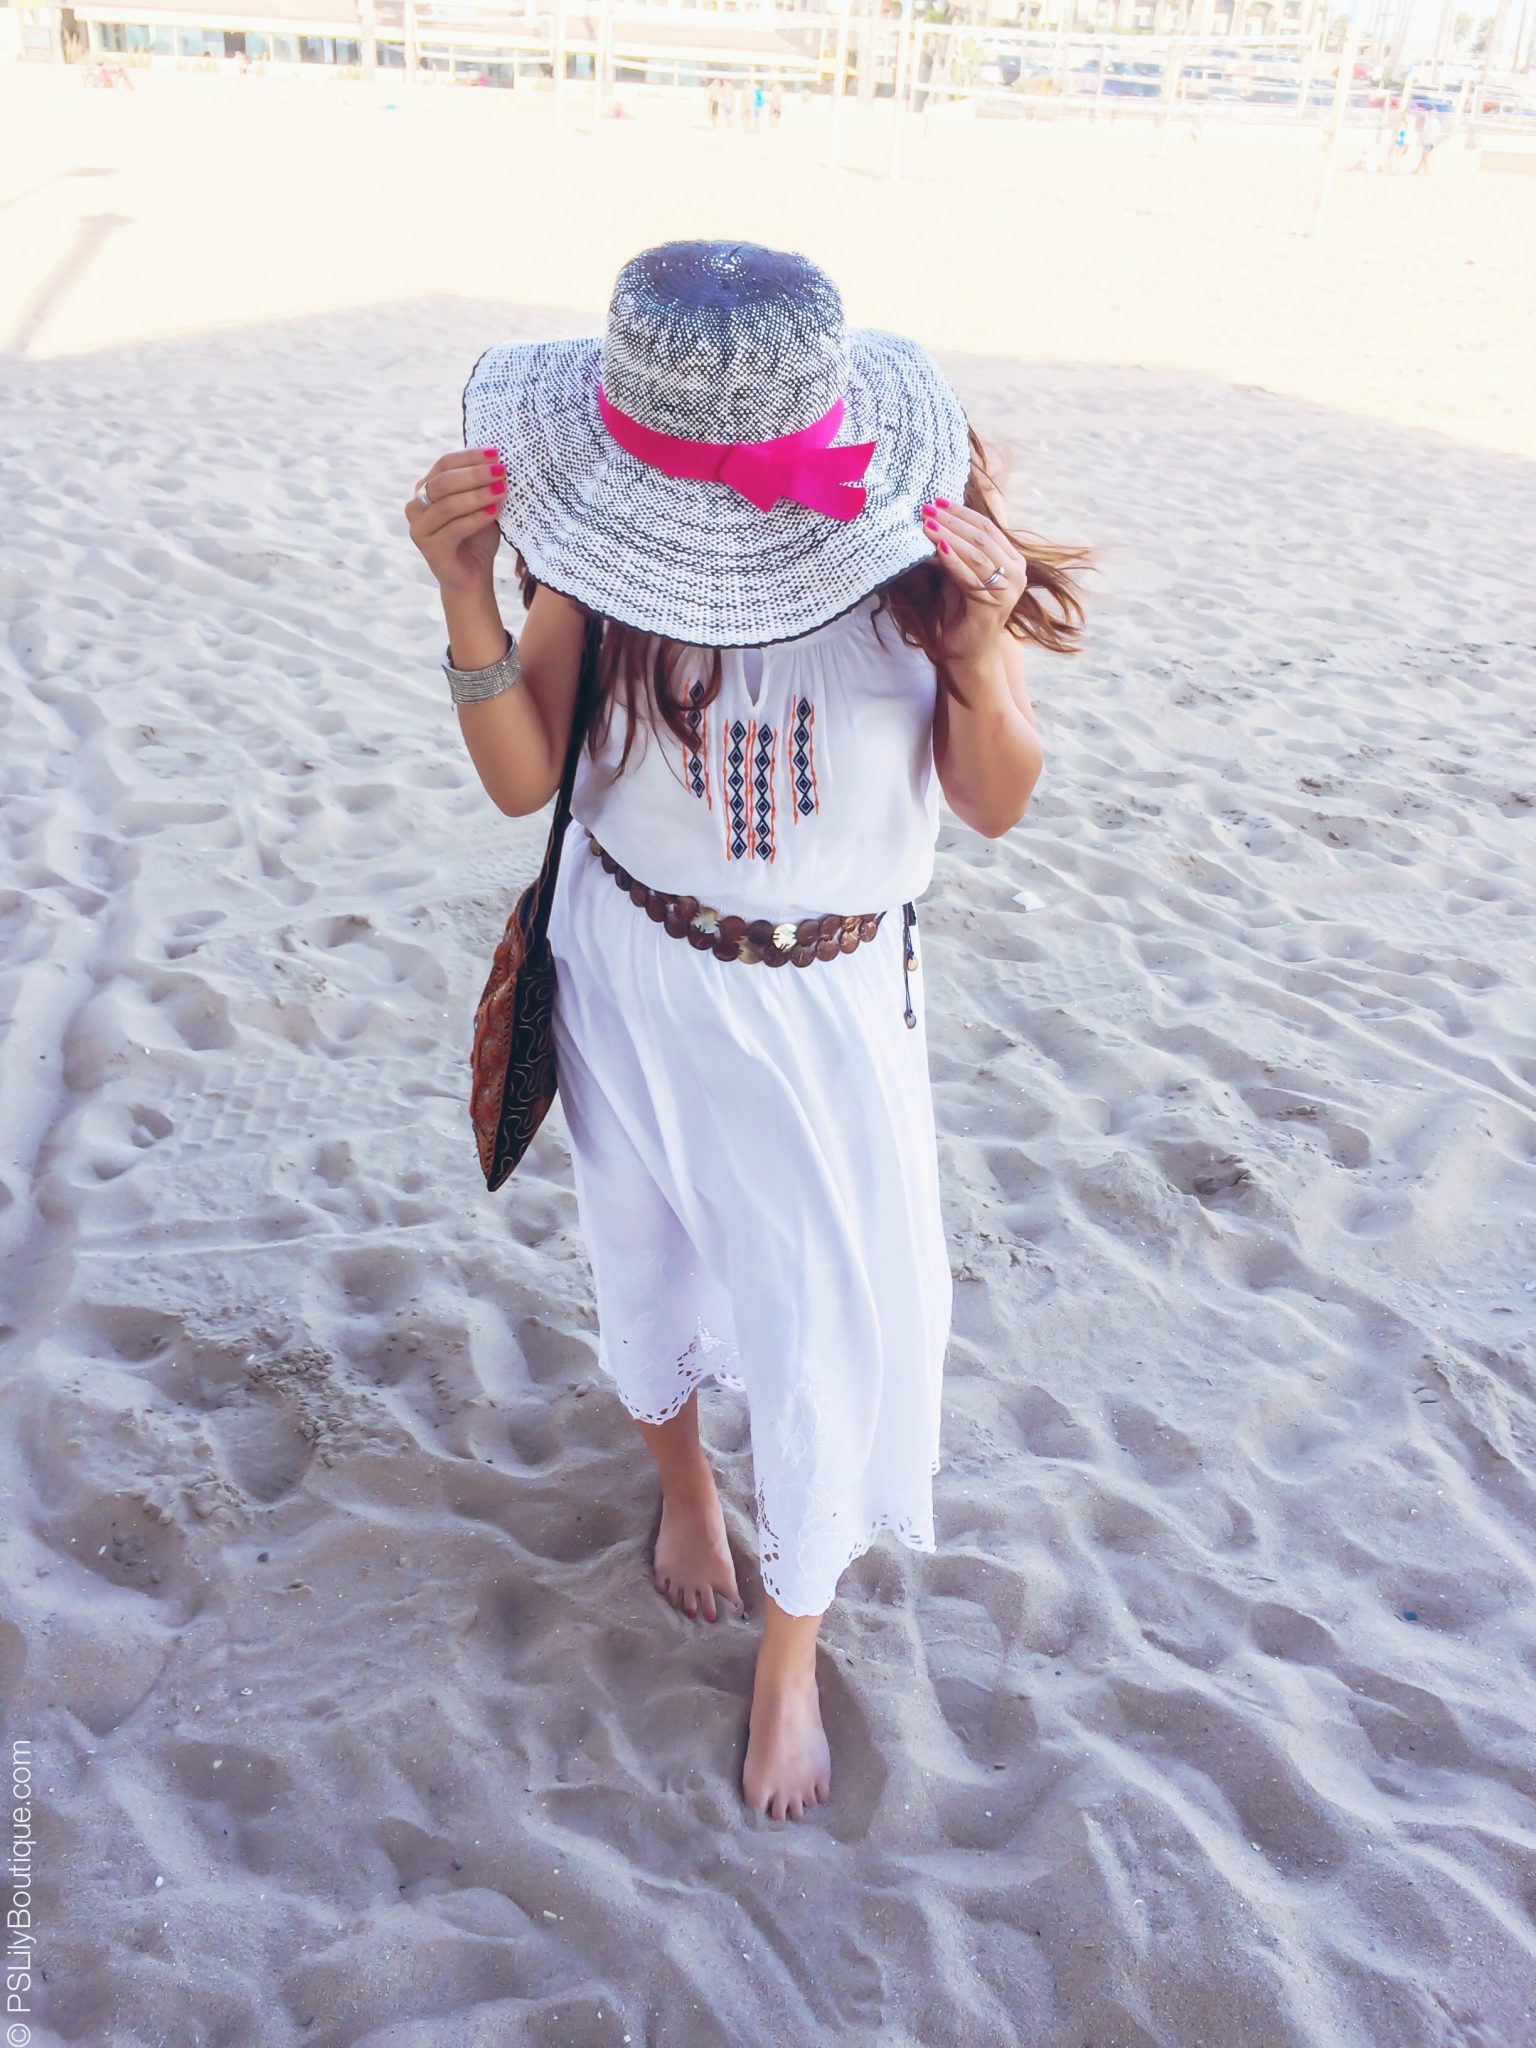 instagram-pslilyboutique-los-angeles-fashion-blogger-white-nordstrom-accessory-collection-floppy-hat-10-25-2015, Instagram: @pslilyboutique, Pinterest, Los Angeles fashion blogger, top fashion blog, best fashion blog, fashion & personal style blog, travel blog, lifestyle blogger, travel blogger, LA fashion blogger, chicago based fashion blogger, fashion influencer, luxury fashion, luxury travel, luxury influencer, luxury lifestyle, lifestyle blog, huntington beach